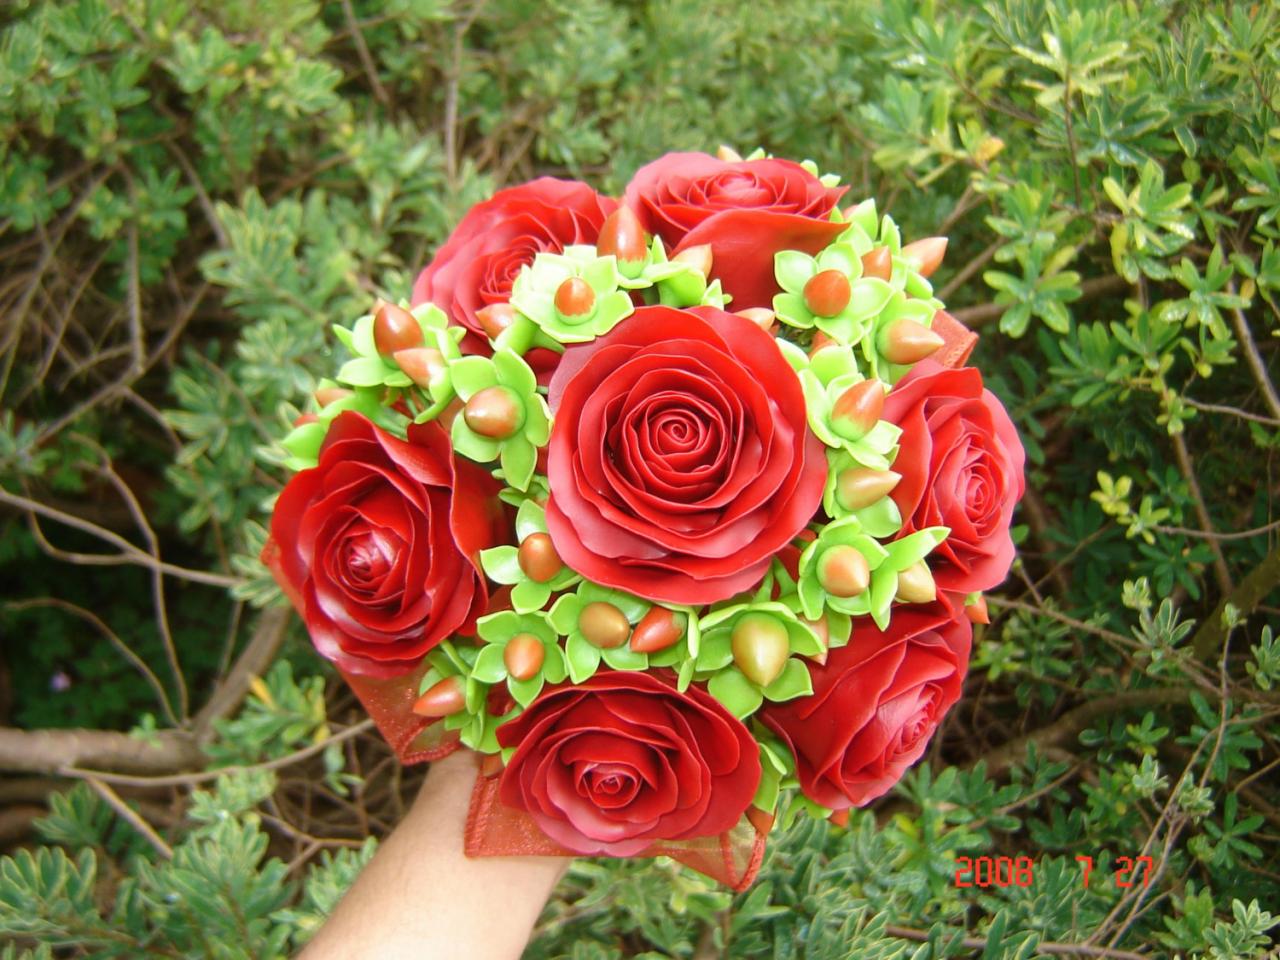 Wedding Bouquet - Red Rose and Hypericum Berries Bridal/Bridesmaid Bouquet